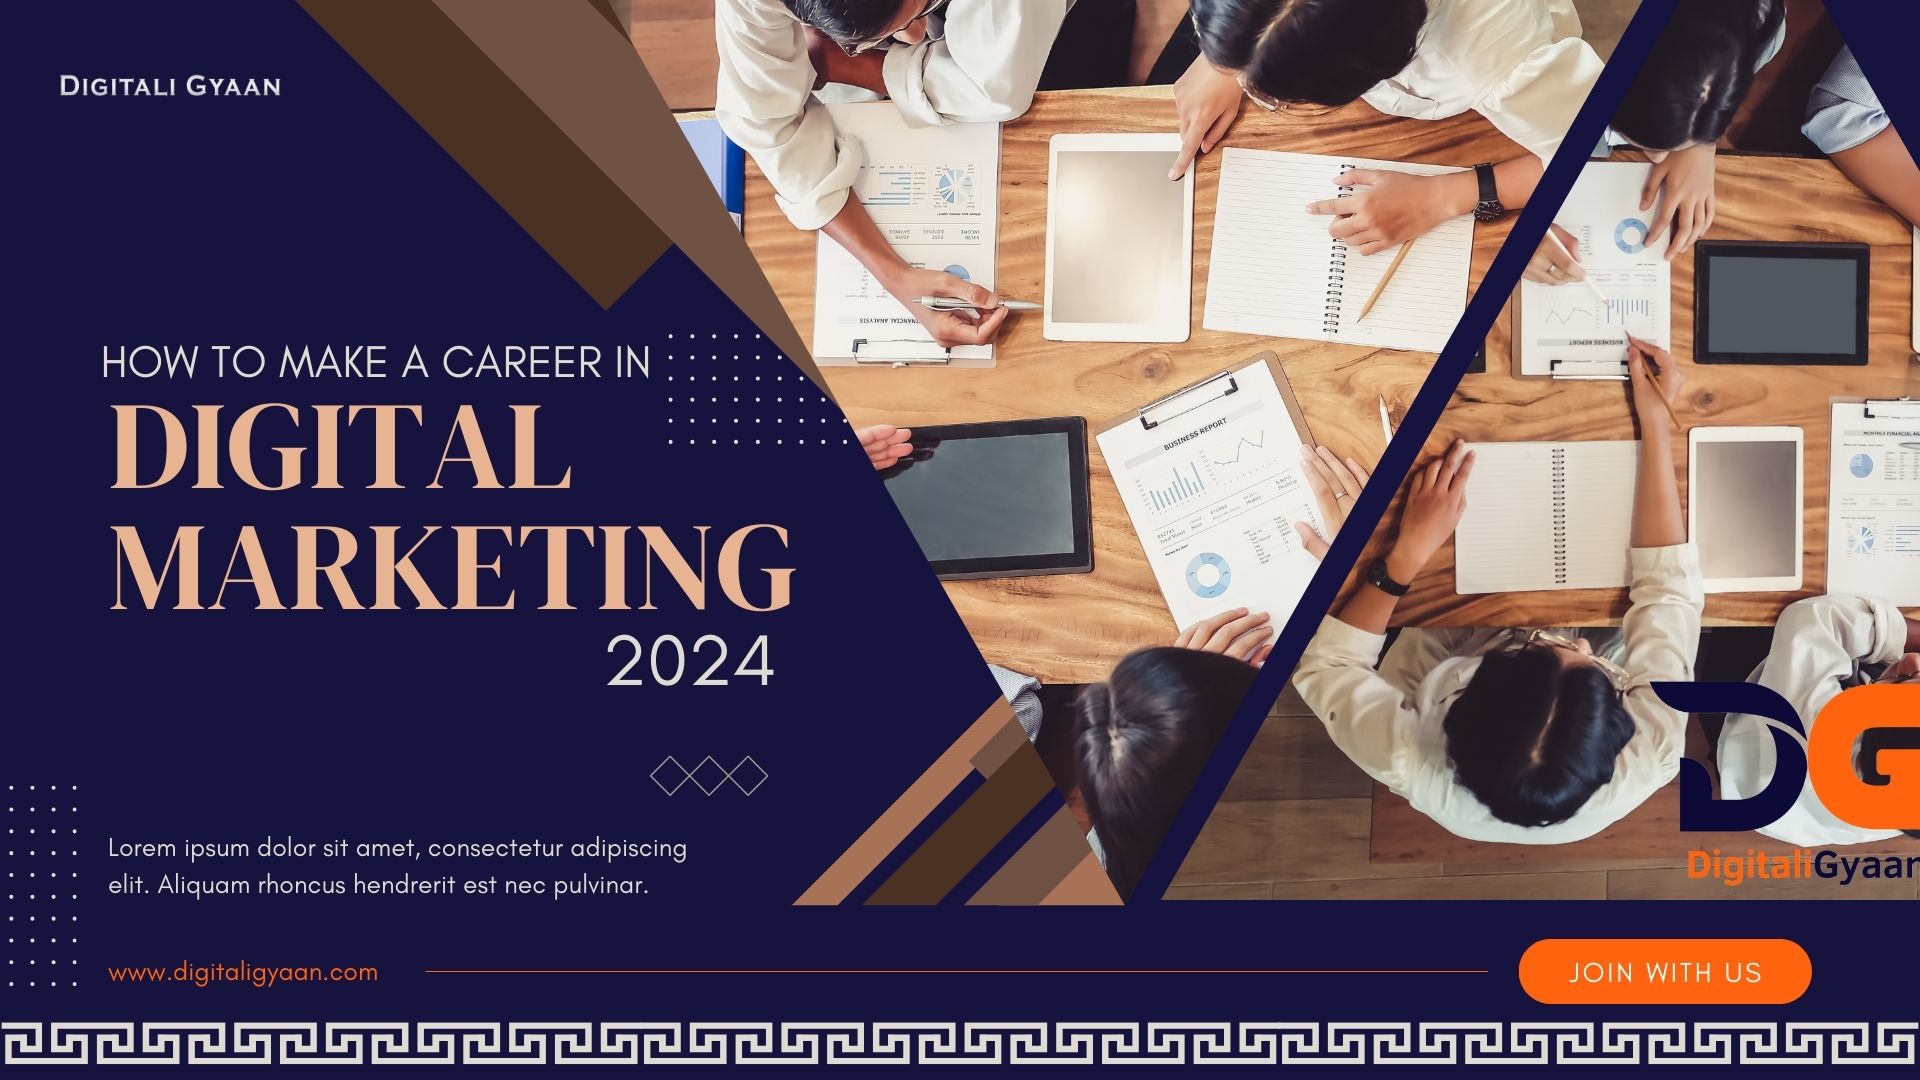 How To Make A Career in Digital Marketing 2024 Learn More | DigitaliGyaan®